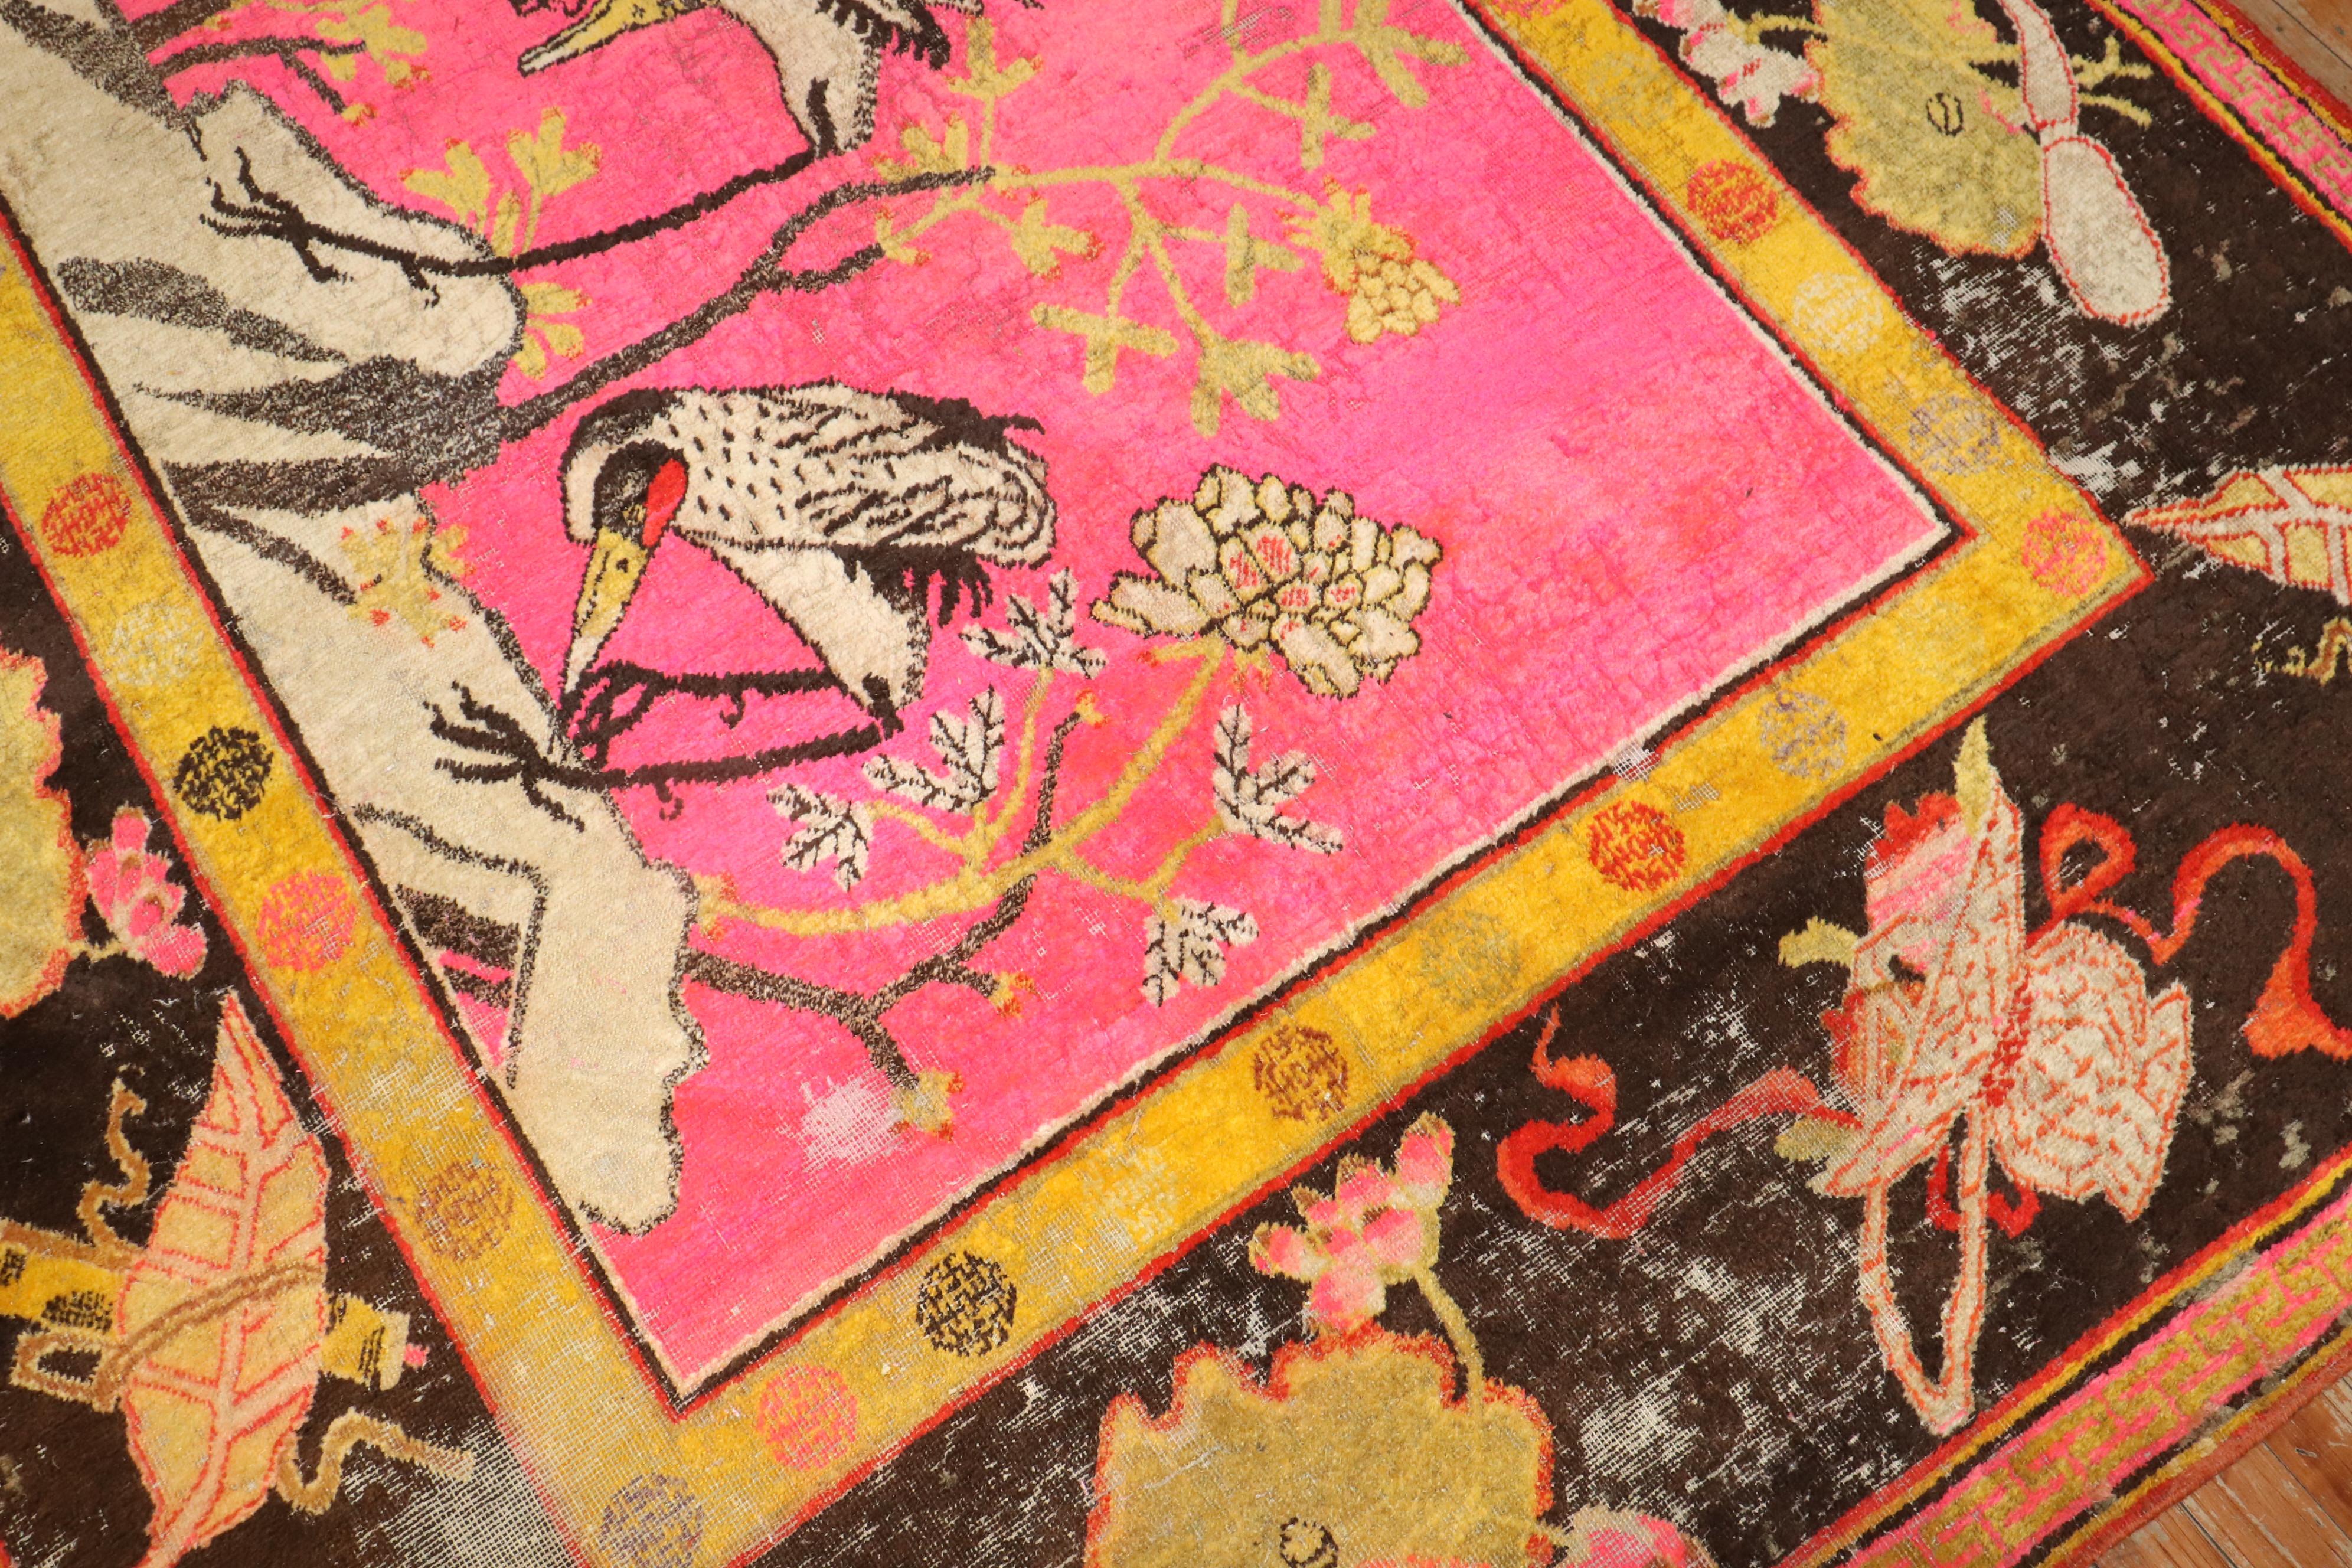 Zabihi Collection Bright Pink Antique Worn Flamingo Pictorial Khotan Rug For Sale 4